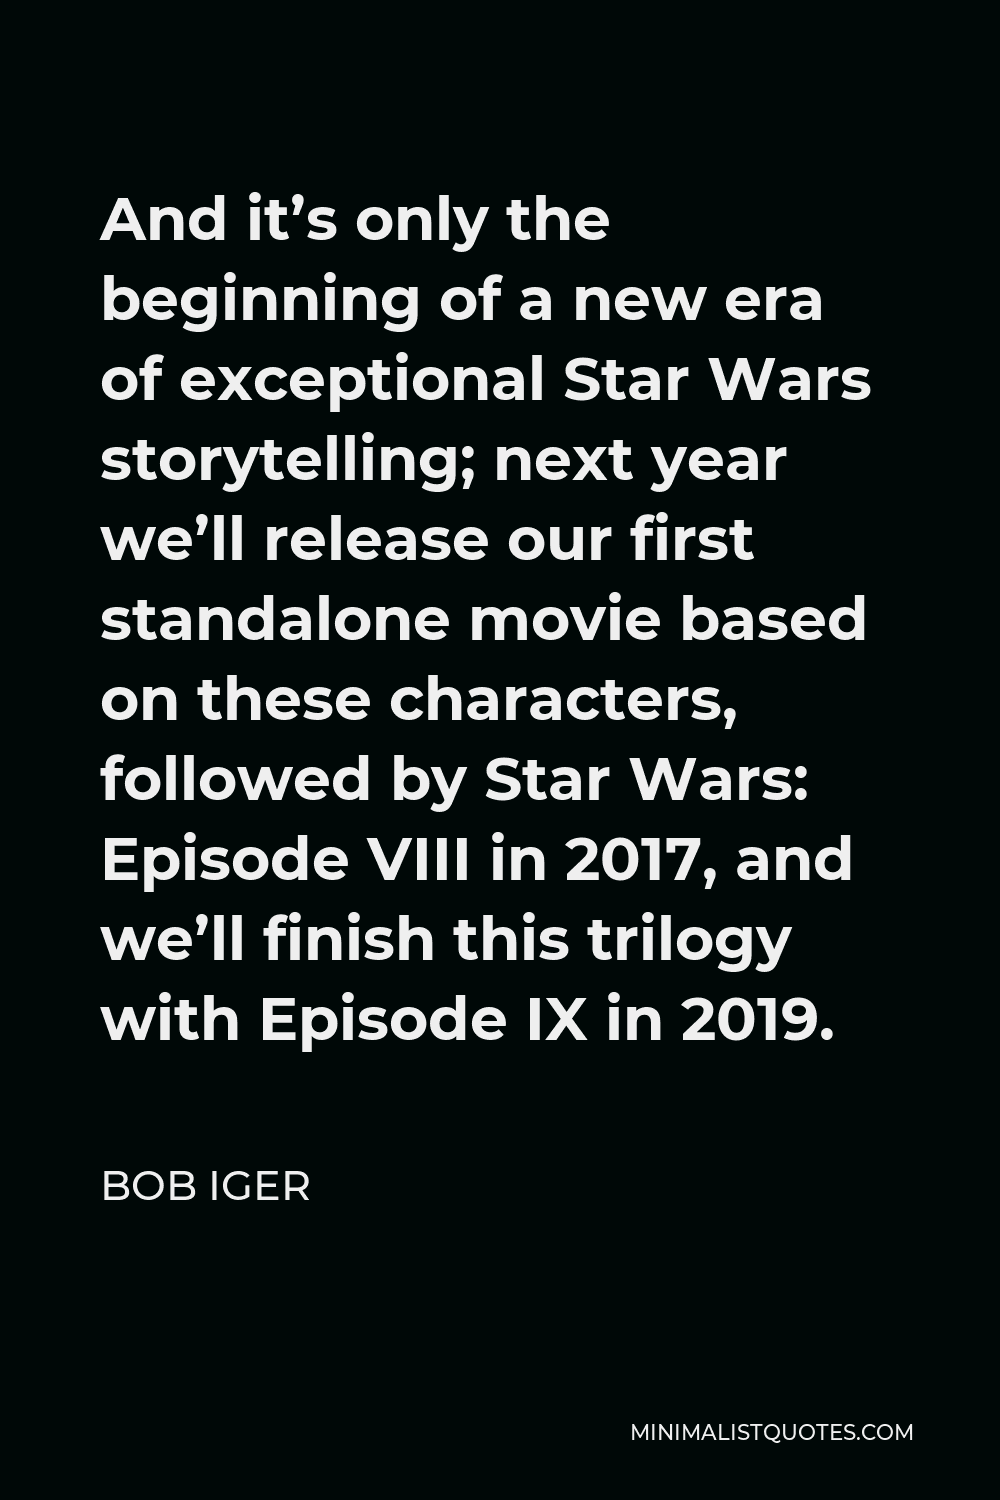 Bob Iger Quote - And it’s only the beginning of a new era of exceptional Star Wars storytelling; next year we’ll release our first standalone movie based on these characters, followed by Star Wars: Episode VIII in 2017, and we’ll finish this trilogy with Episode IX in 2019.